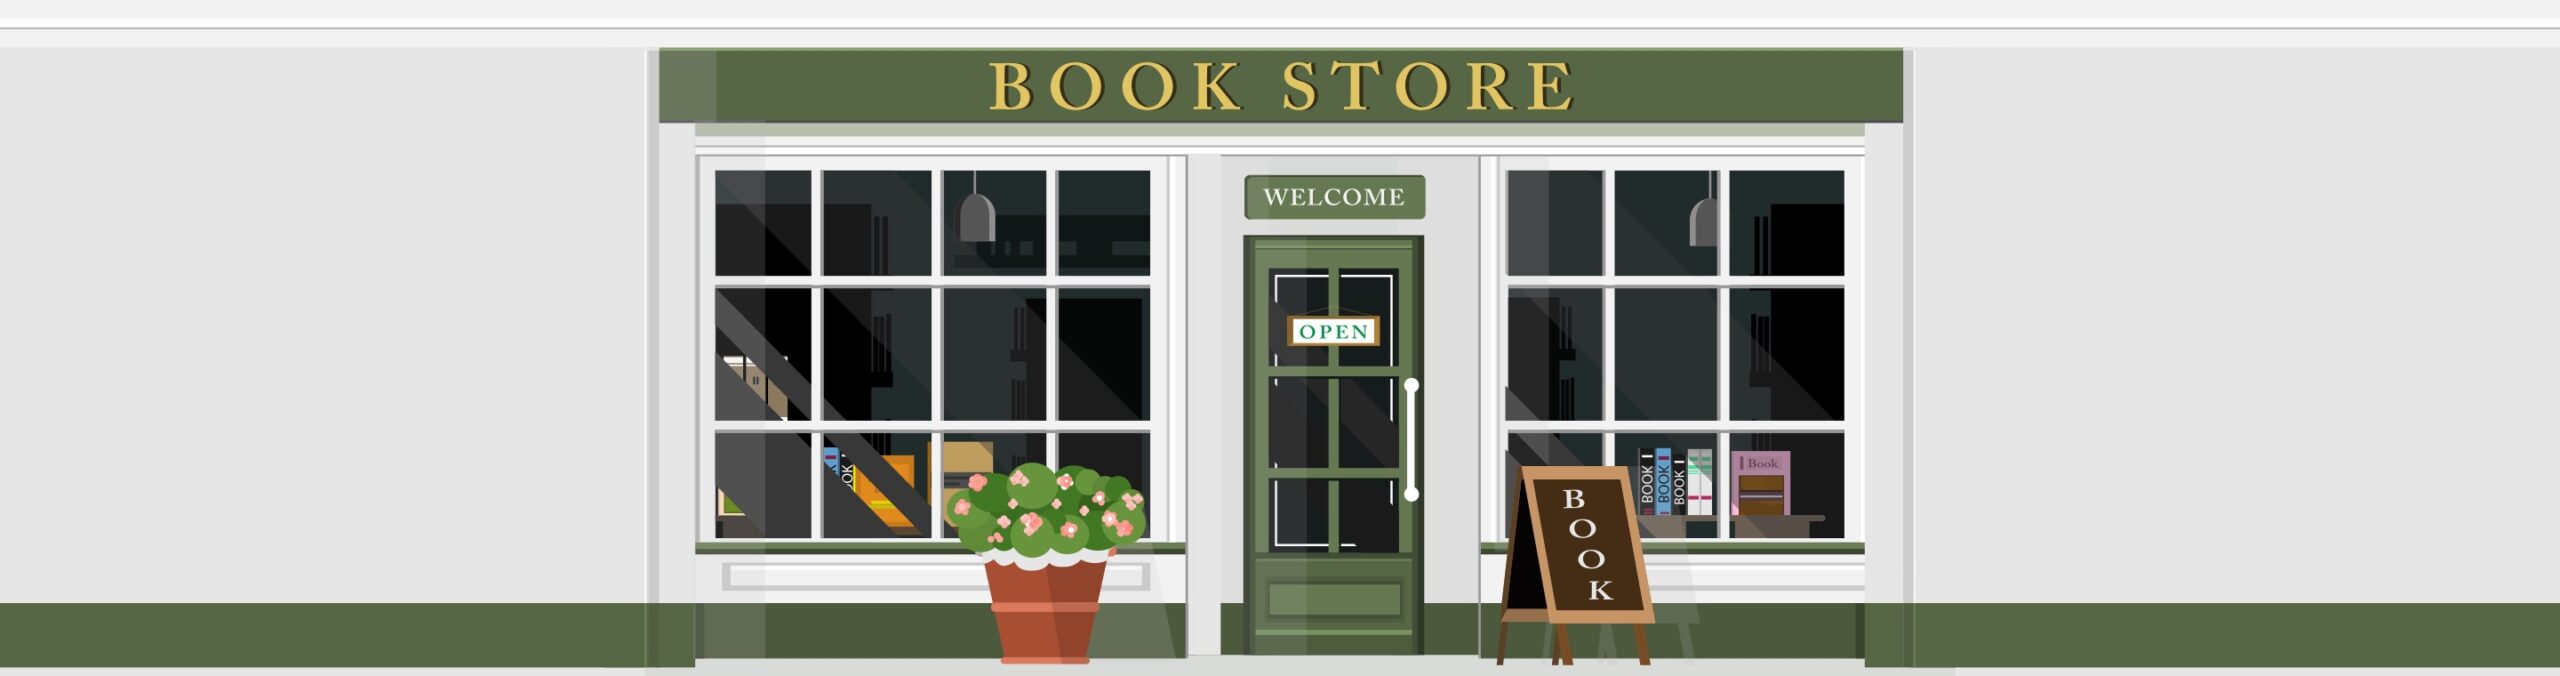 5 author-owned bookstores worth a visit